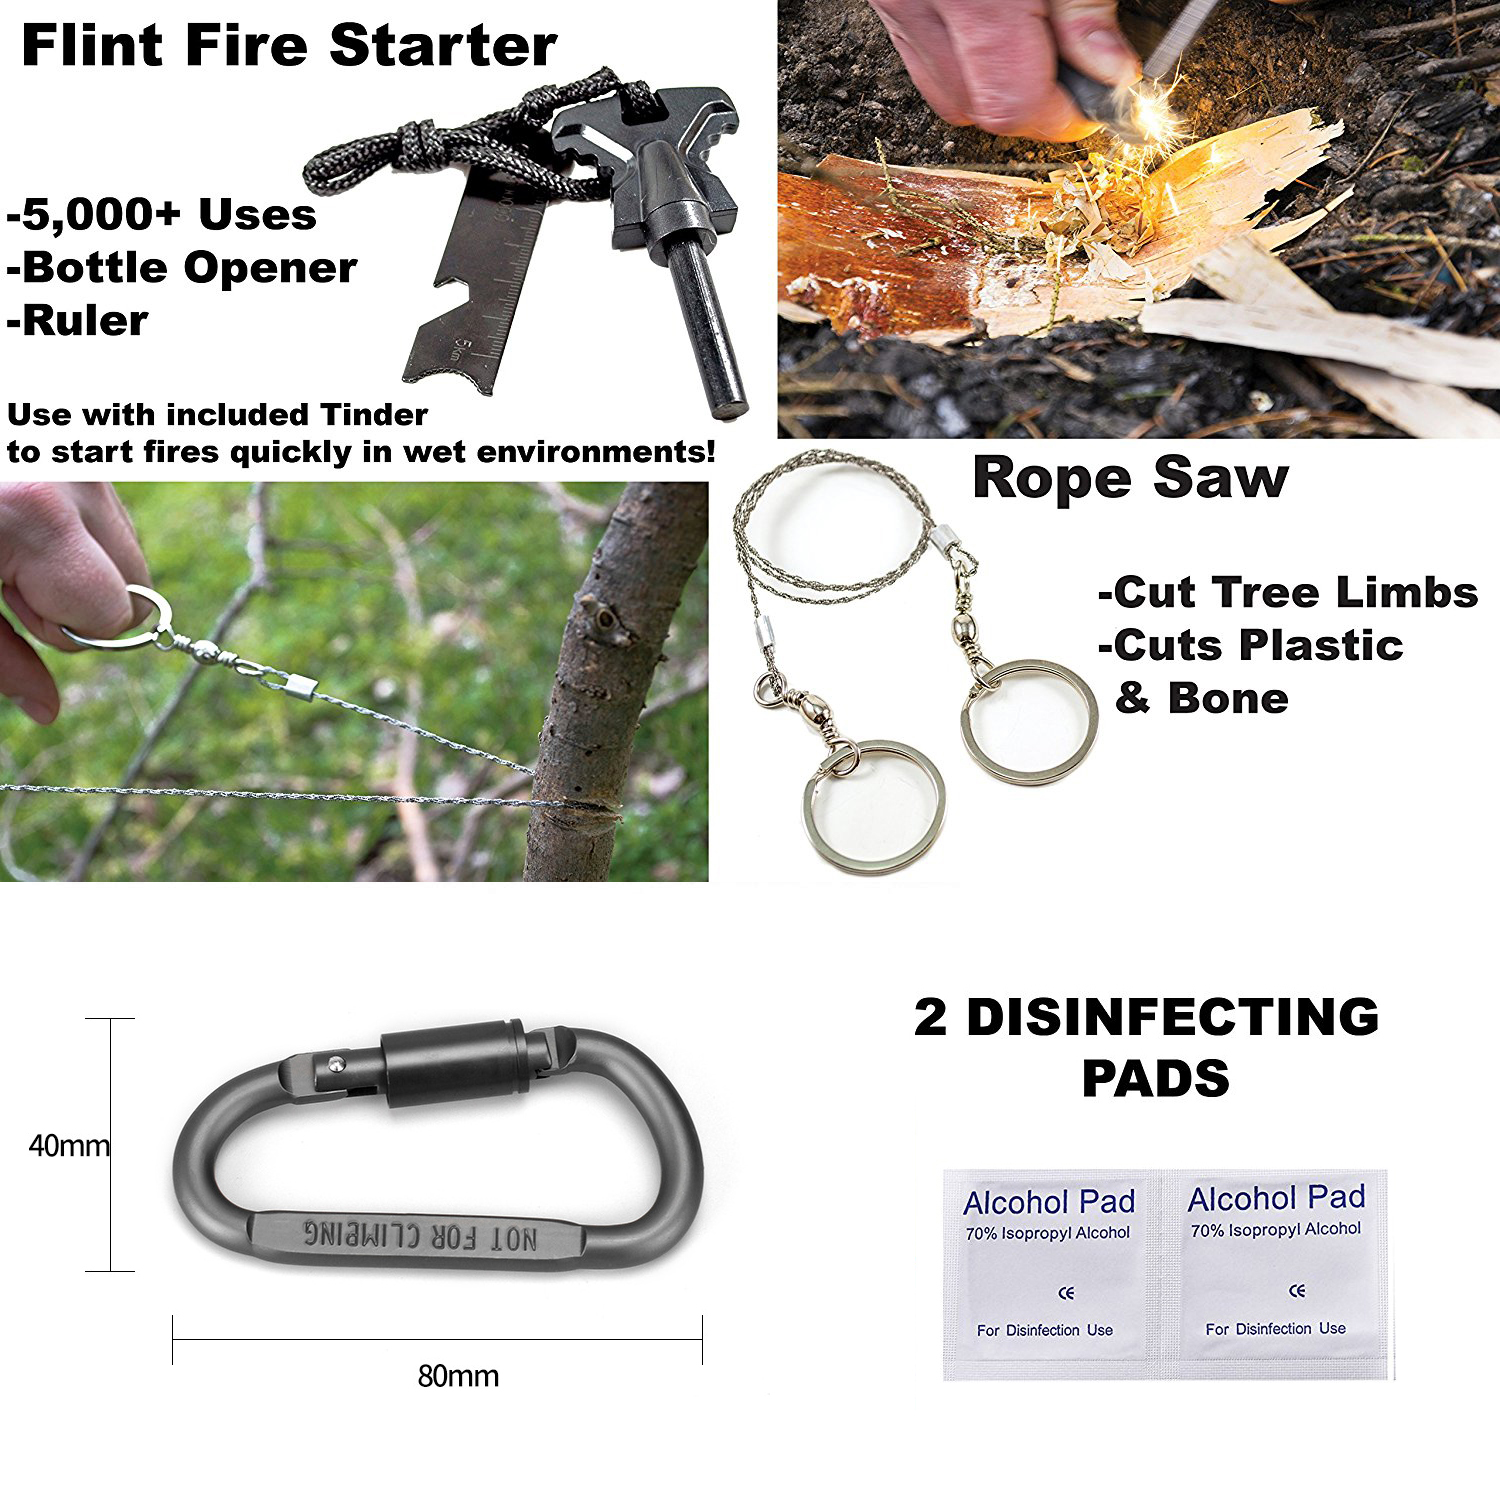 Survival Gear Equipment Fishing Hunting Emergency Camping Survival Kit -  Buy Survival Kit,Camping Gear,Cool Gadget Product on